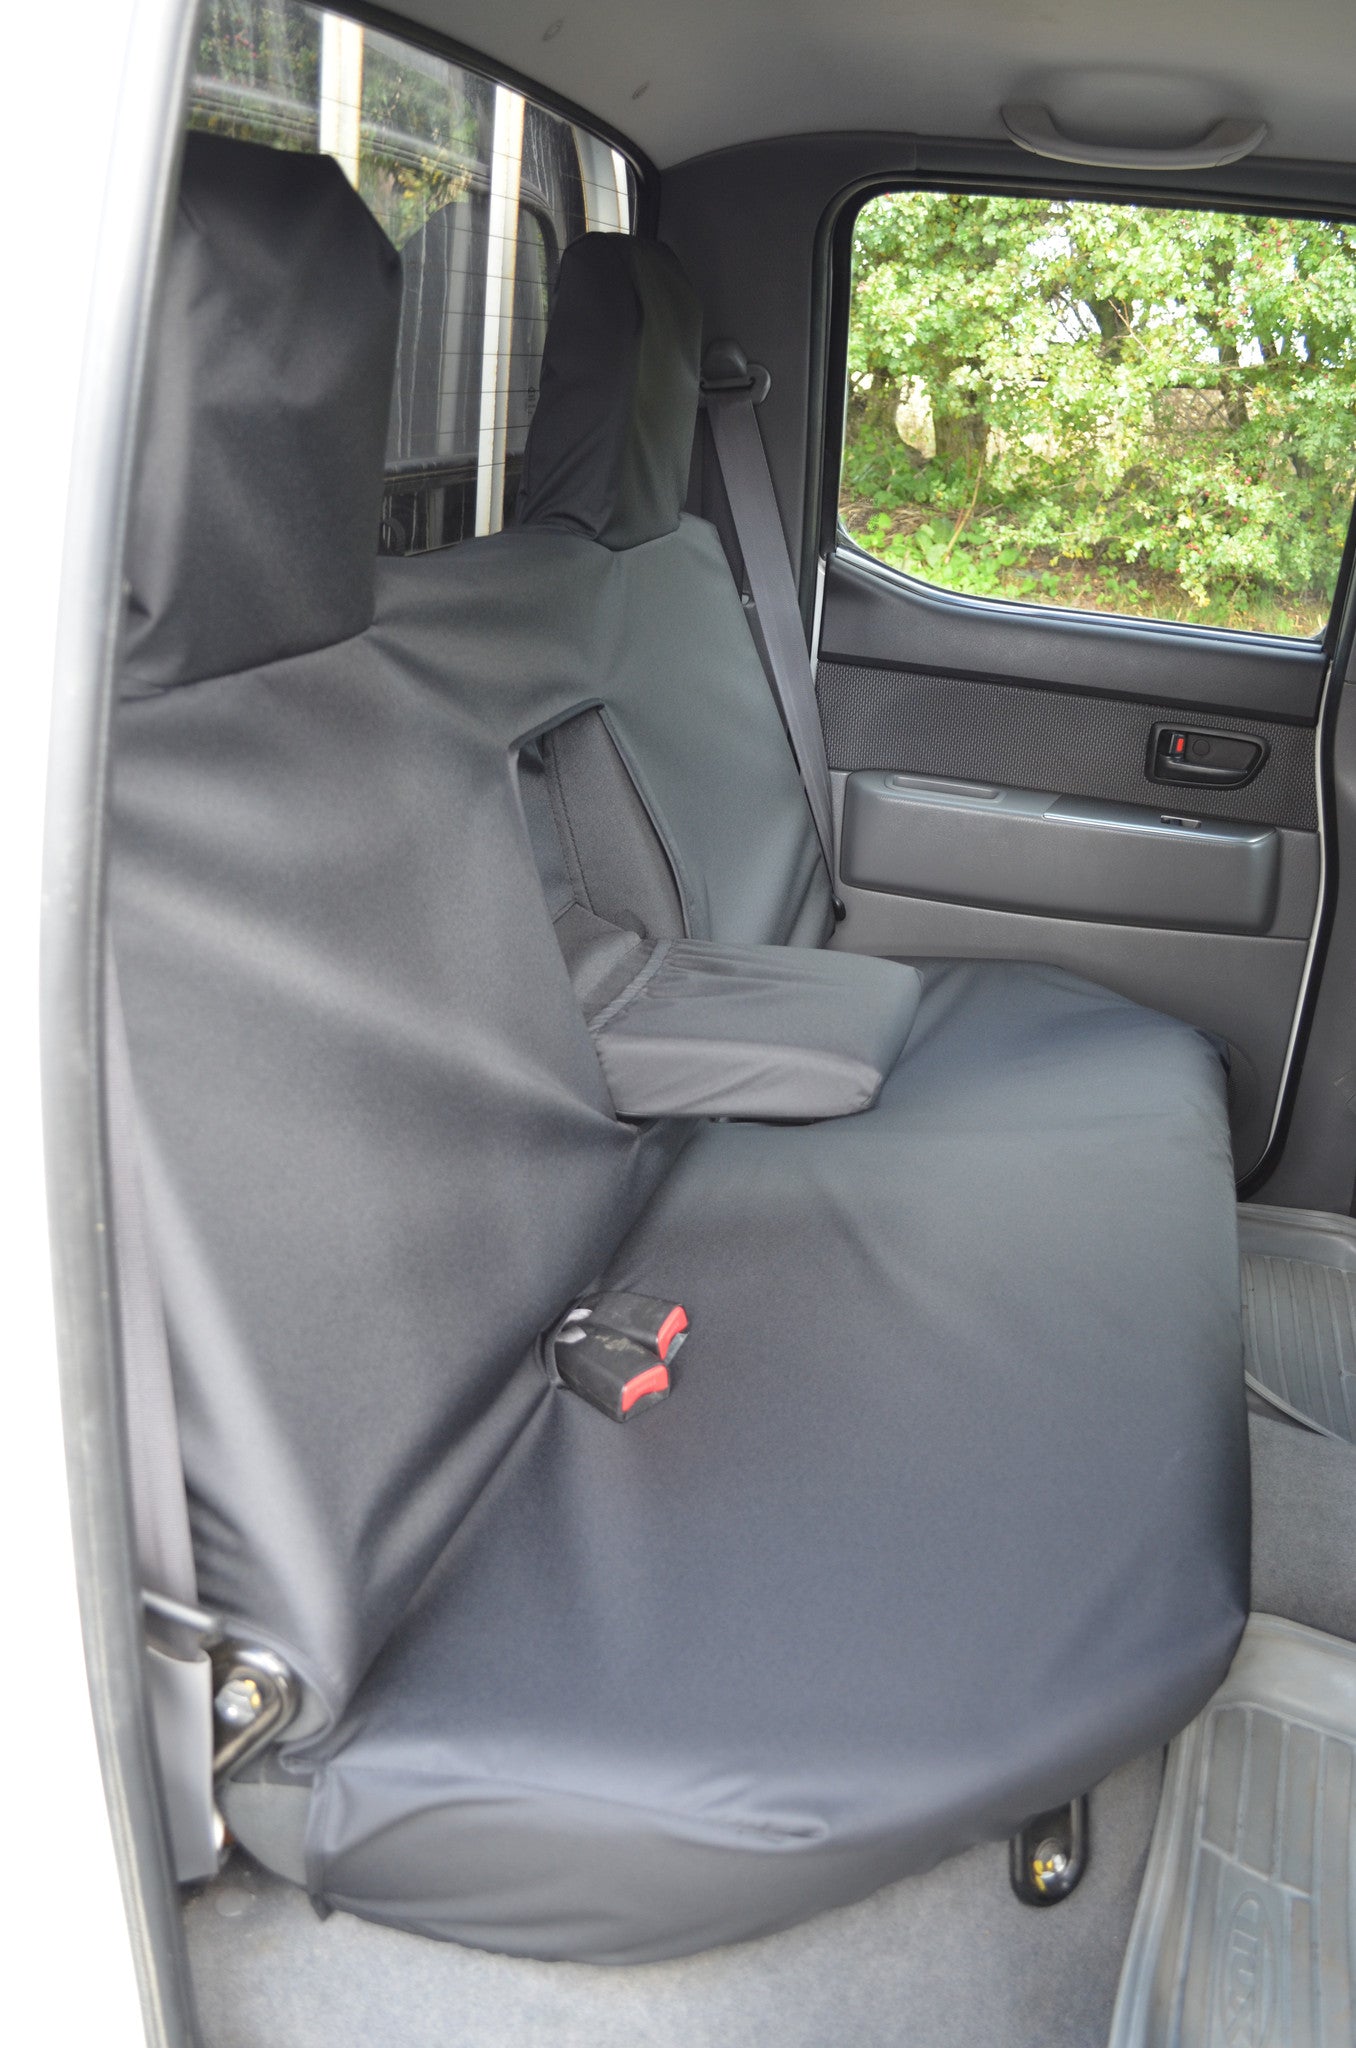 Ford Ranger 2006 to 2012 Seat Covers Rear Seat Cover / Black Turtle Covers Ltd